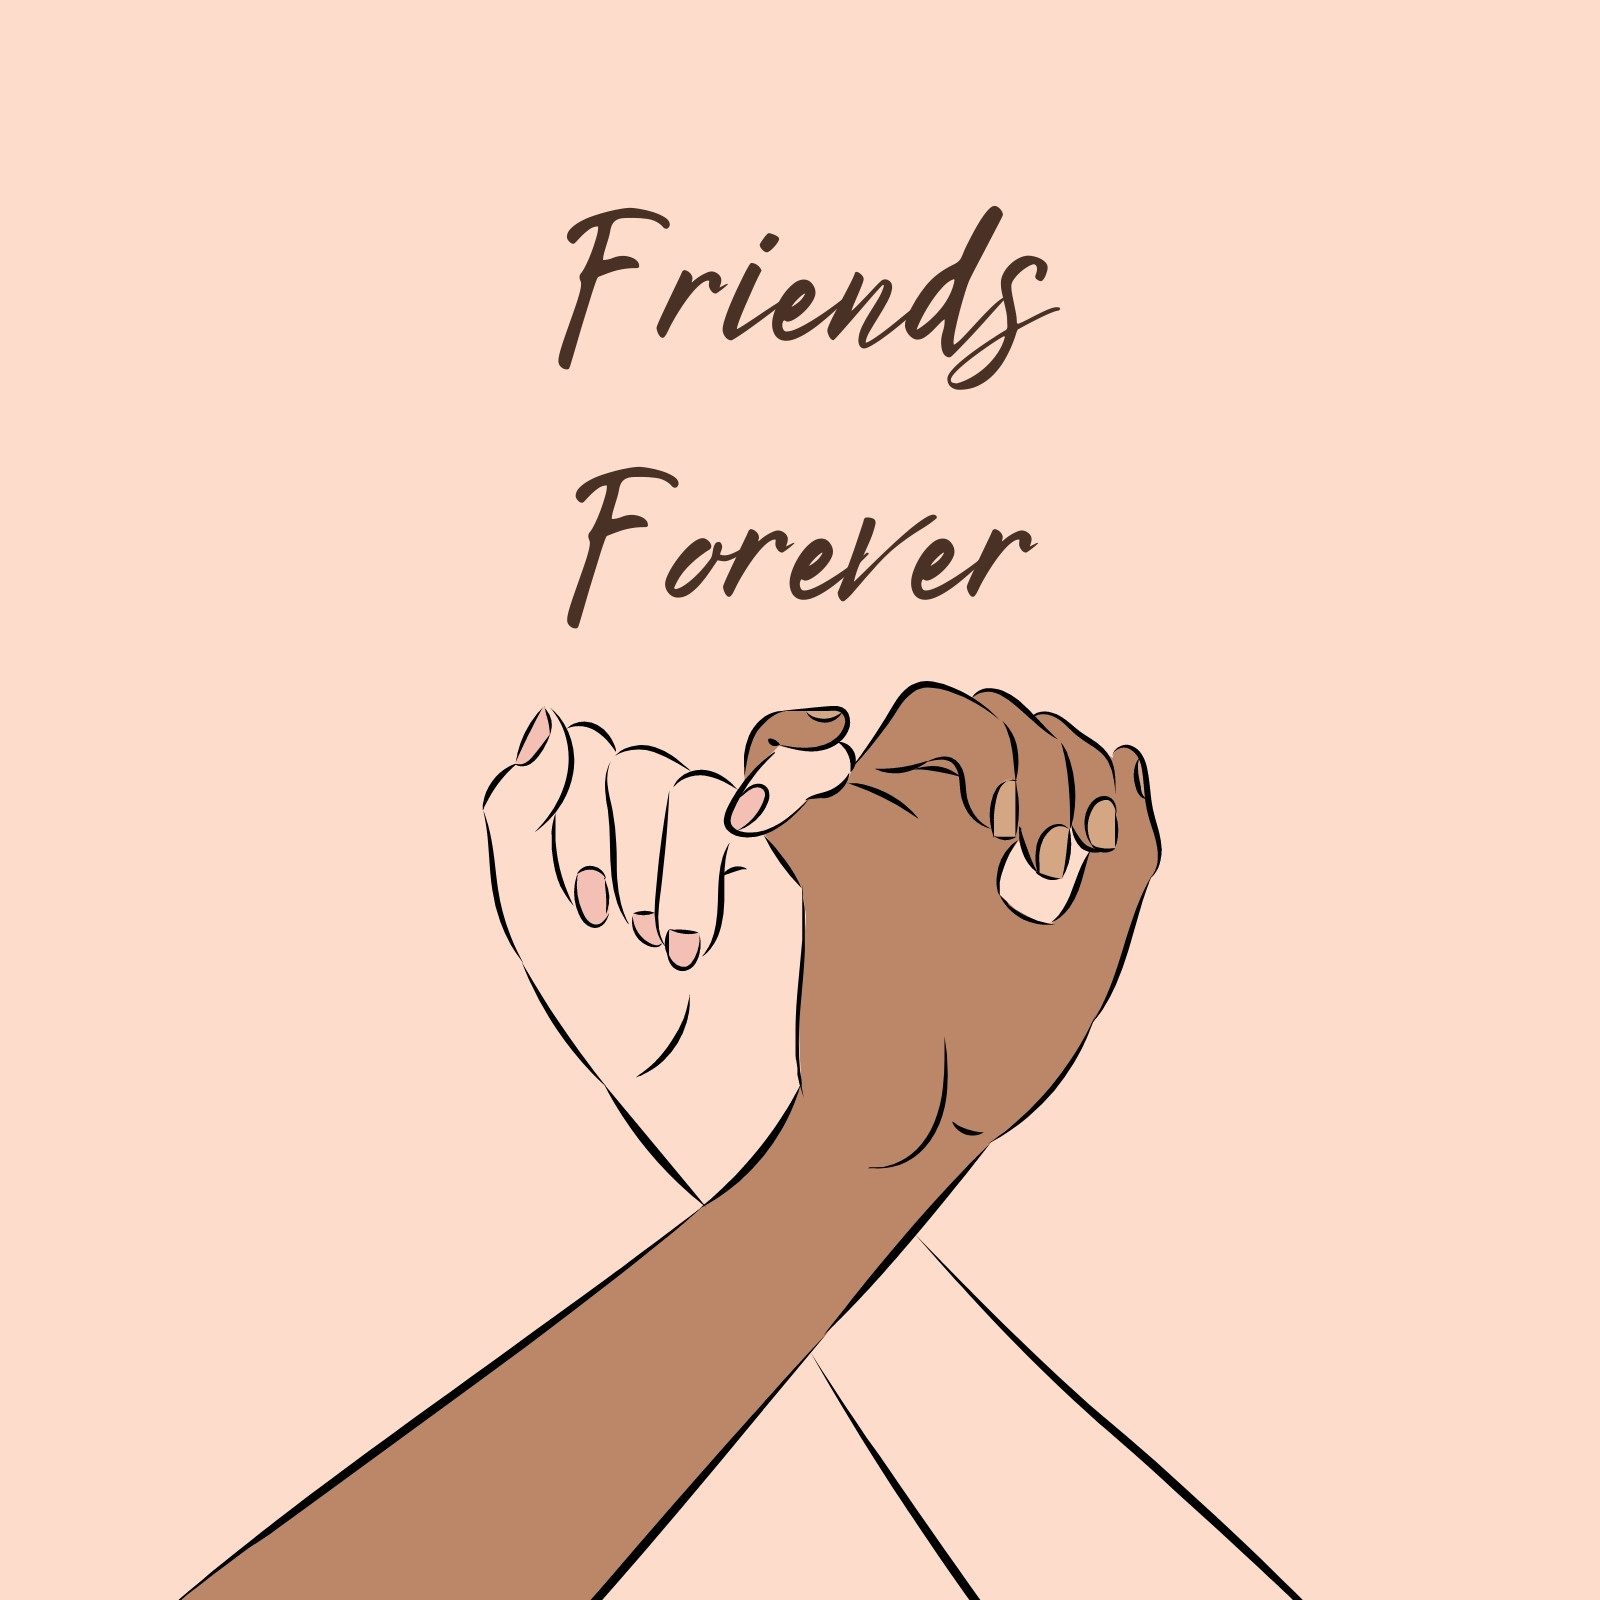 Best Friends Forever Sticker for iOS & Android